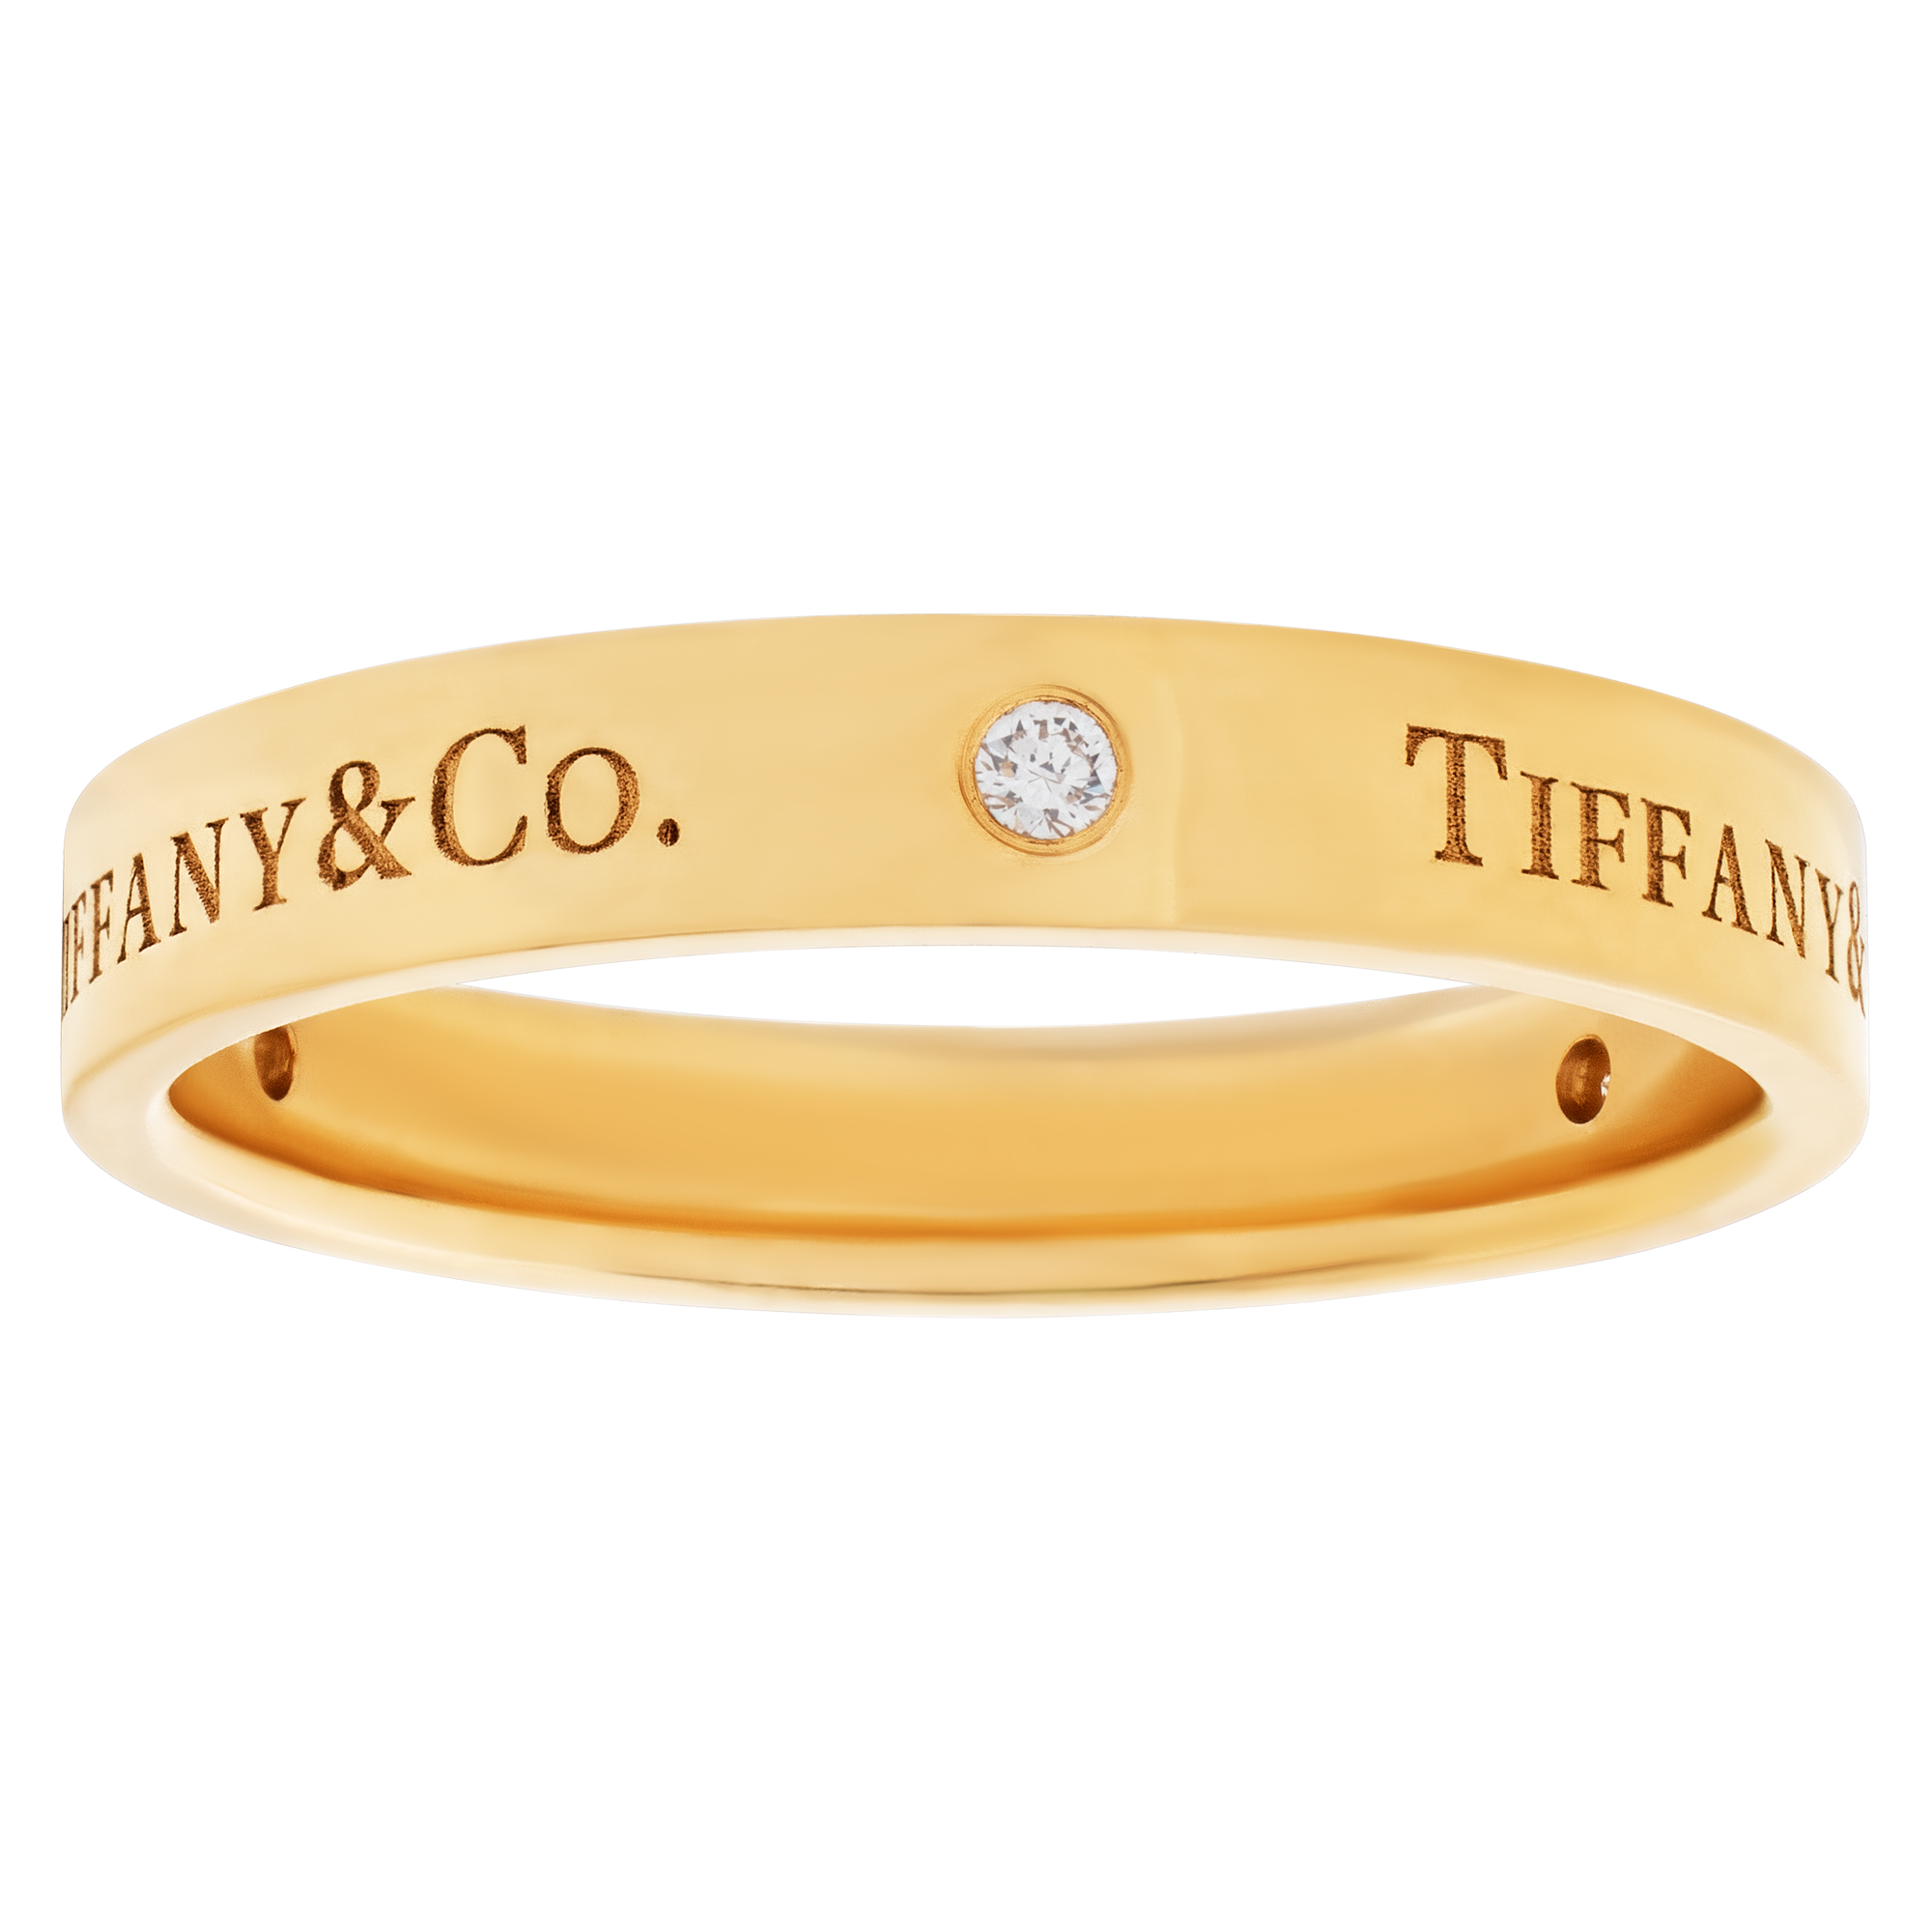 Tiffany & Co. Band with 3 diamonds in 18k yellow gold (Stones) image 1